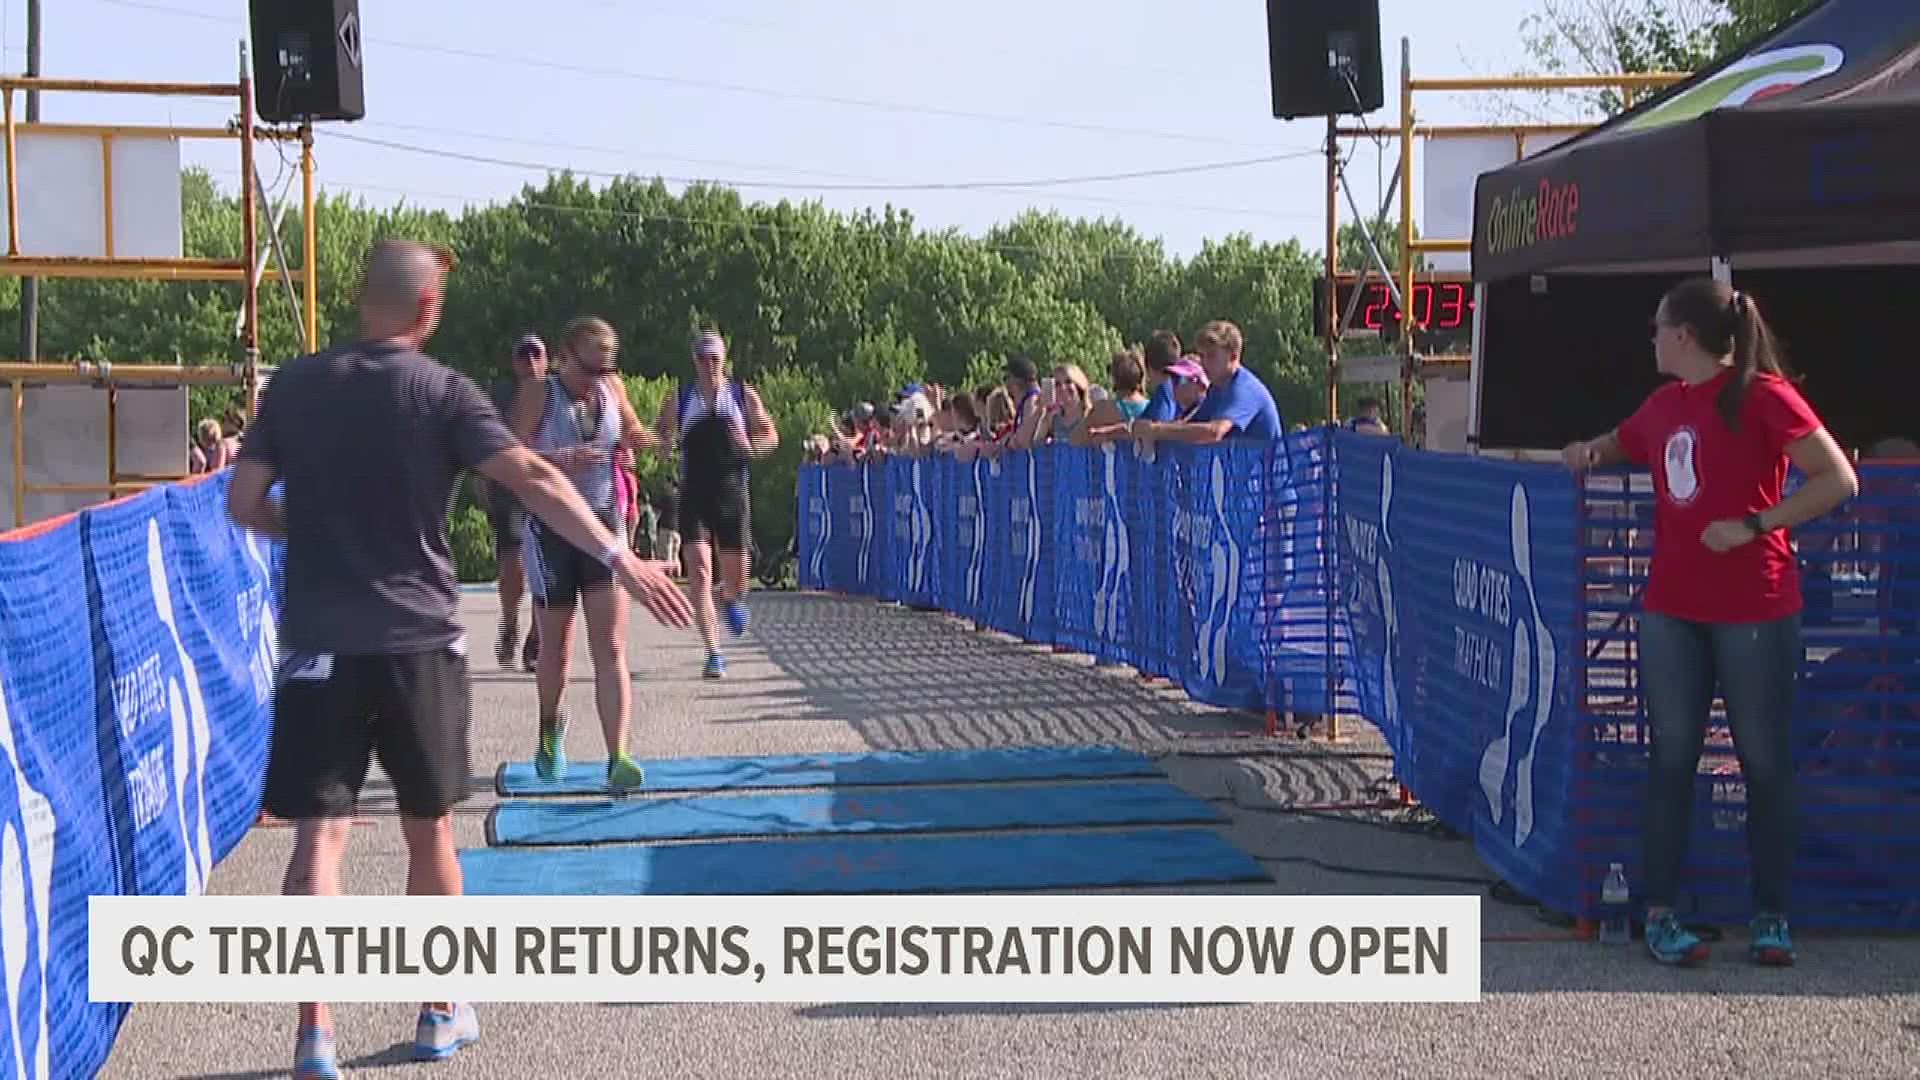 The QC Triathlon is officially returning in 2023 after a four-year hiatus. The 21st Quad Cities Triathlon will take place at West Lake Park on June 17, 2023.